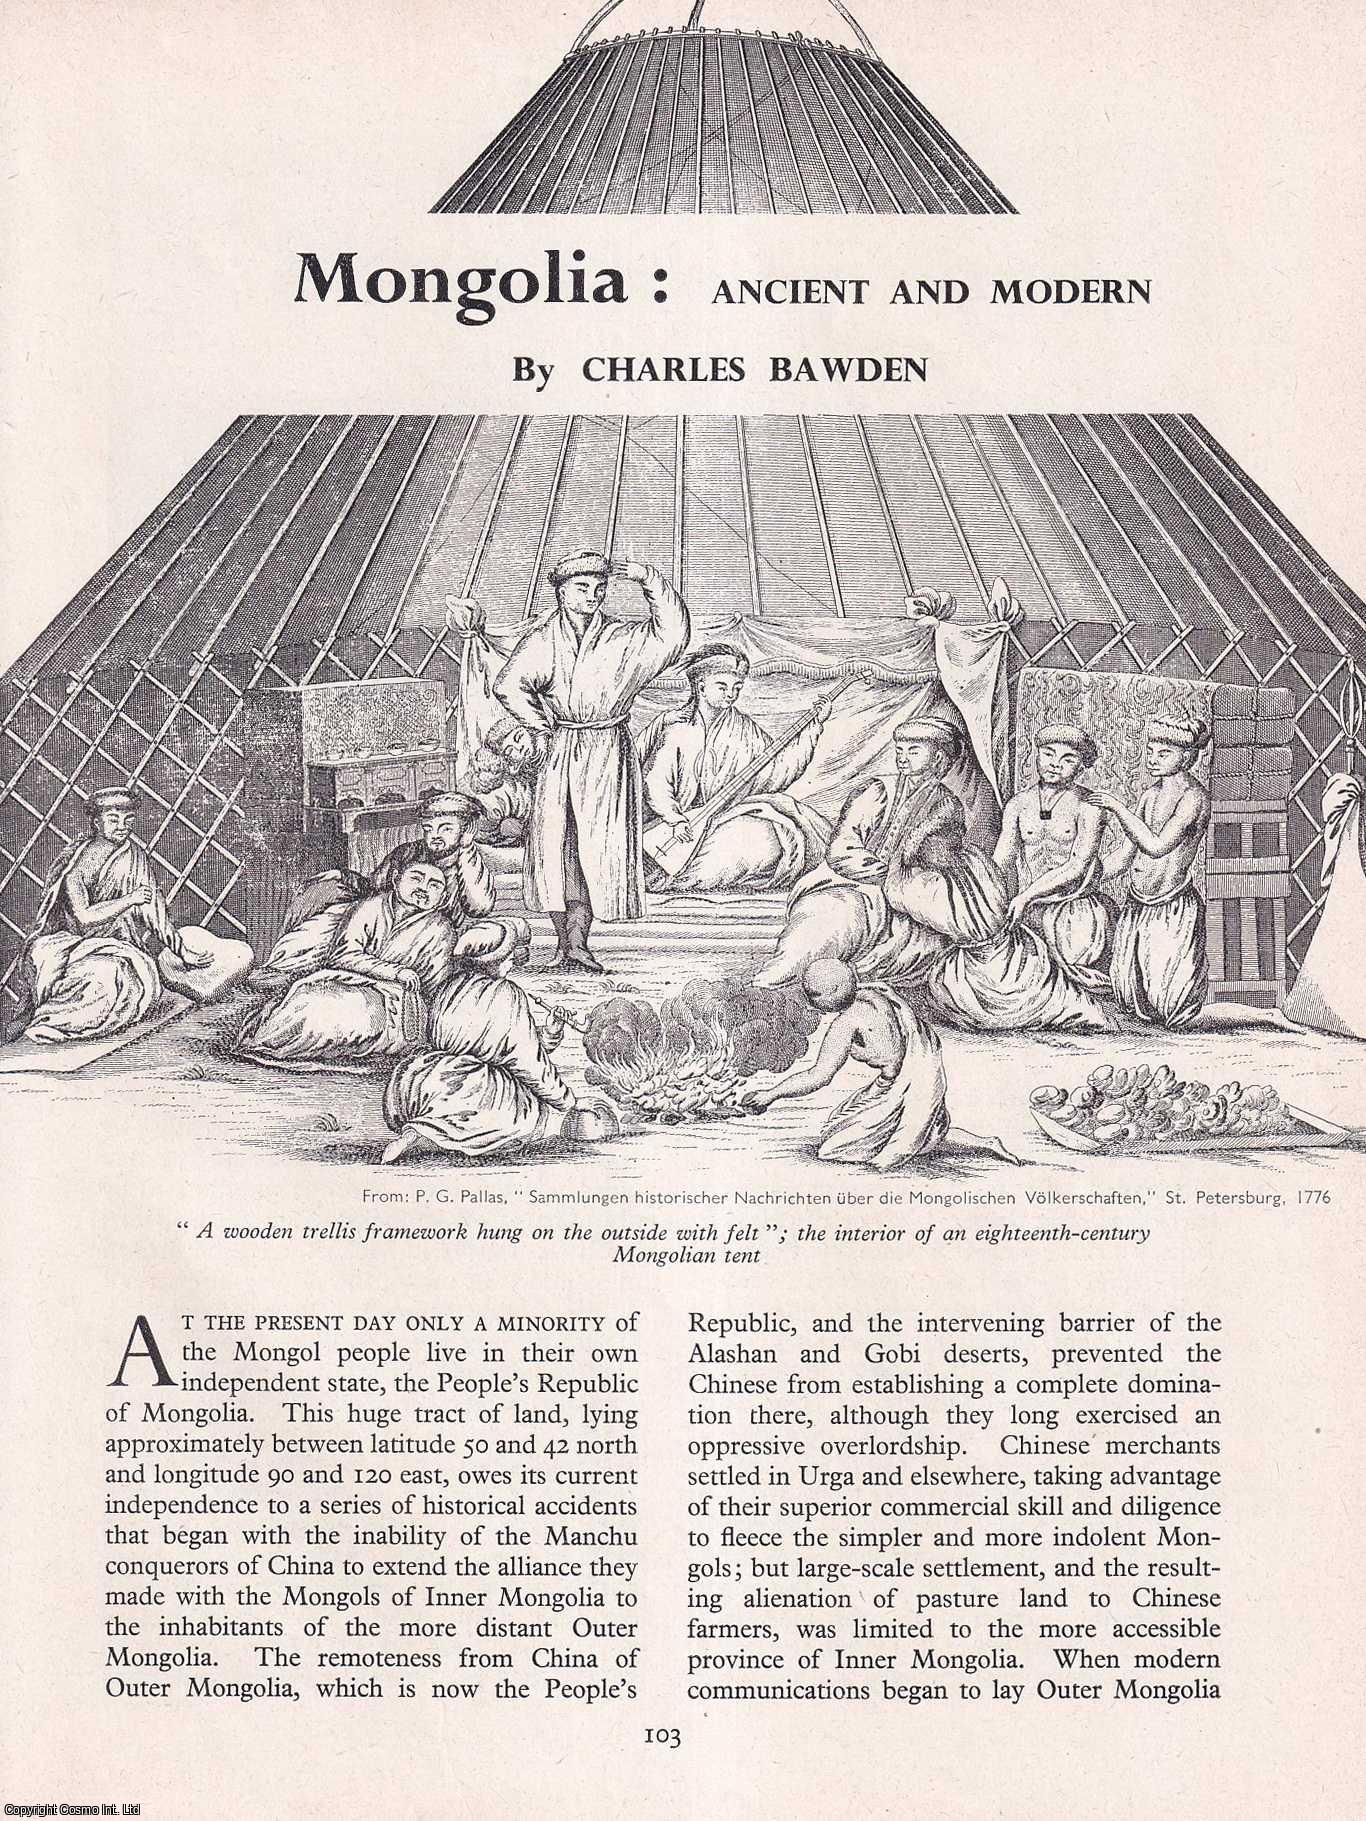 Charles Bawden - Mongolia: Ancient and Modern. An original article from History Today magazine, 1959.